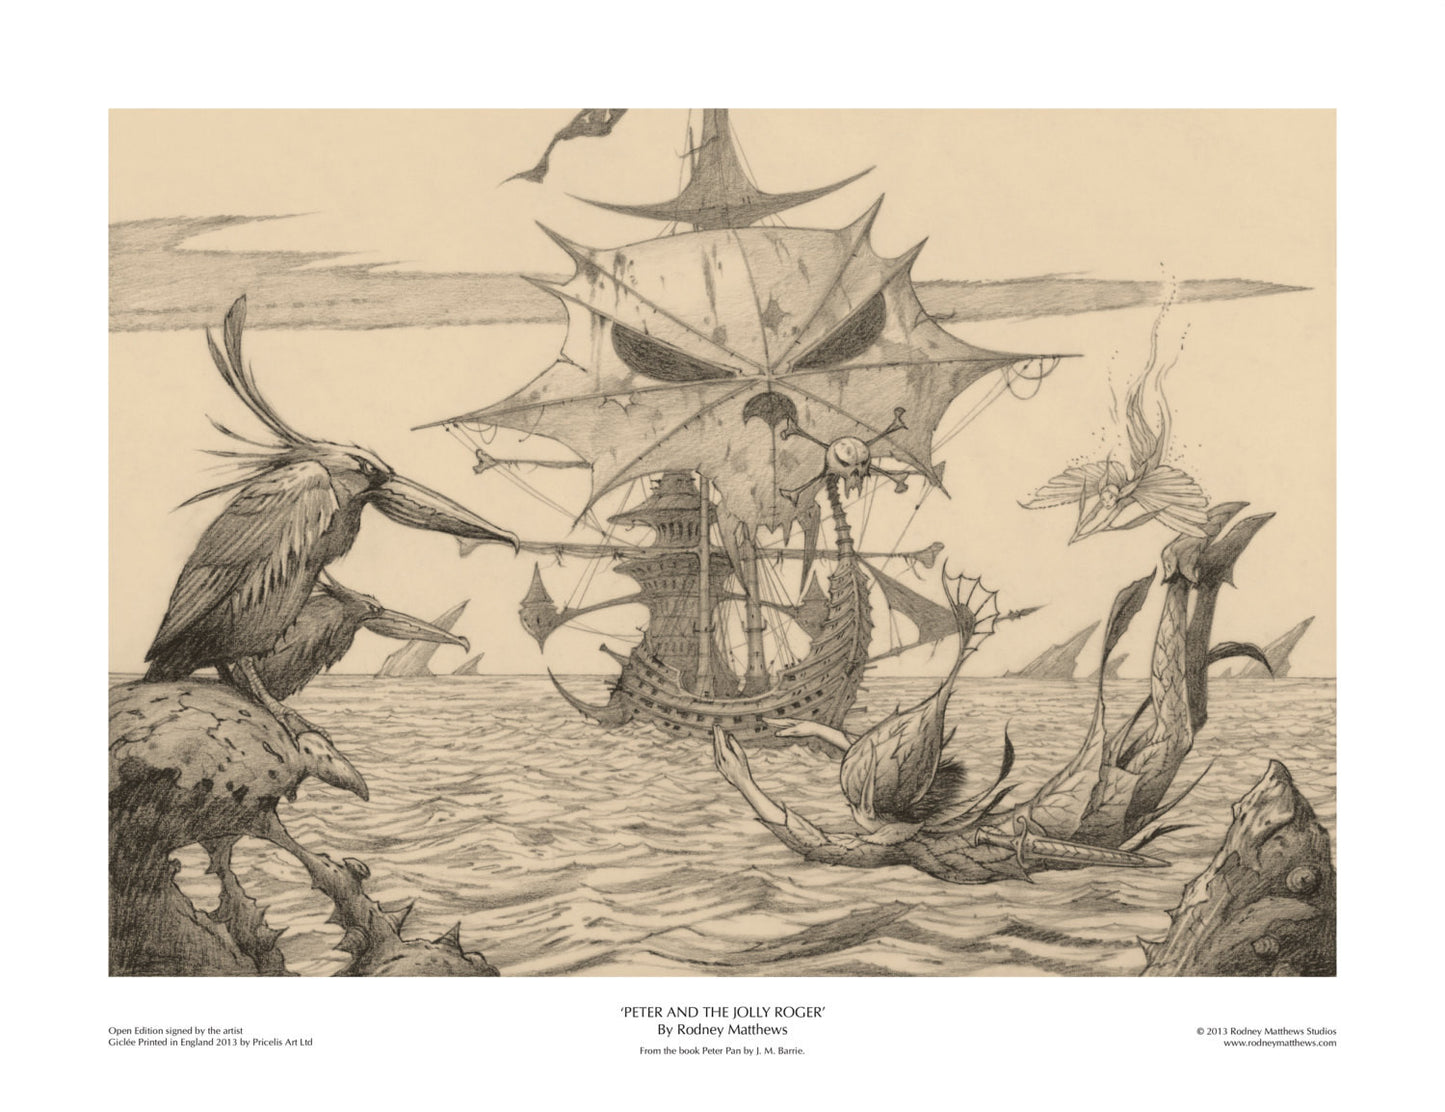 Peter and the Jolly Roger (Peter Pan) open edition print, hand-signed by Rodney Matthews